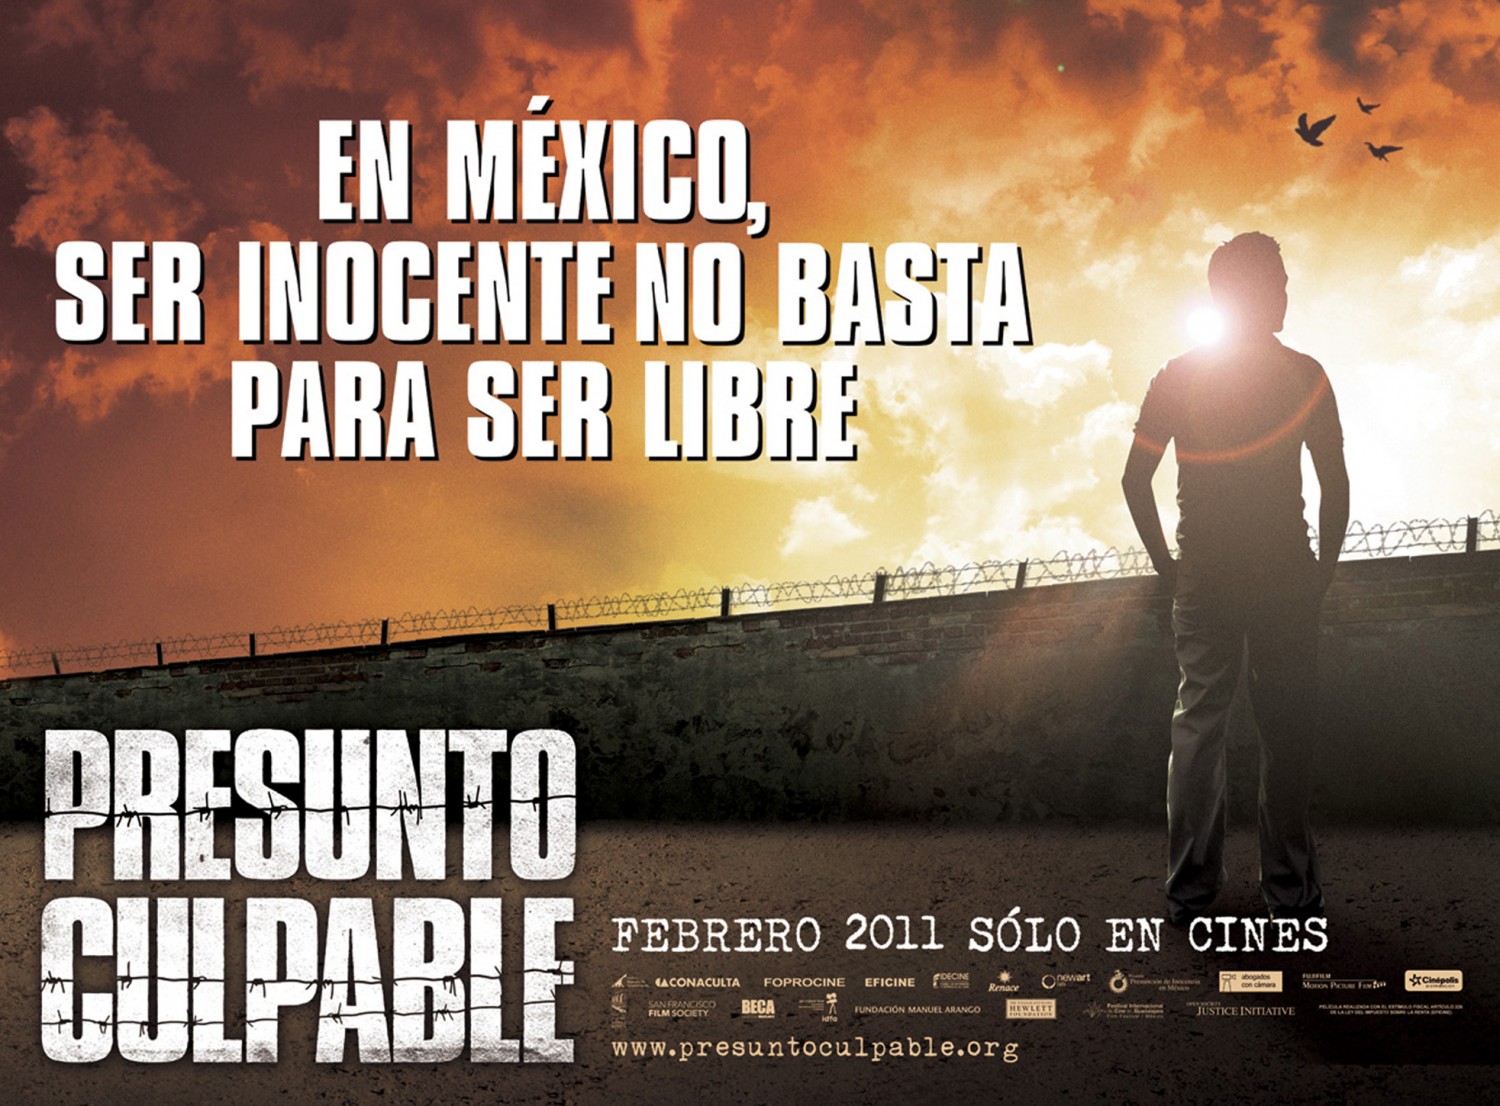 Extra Large Movie Poster Image for Presunto culpable (#3 of 3)